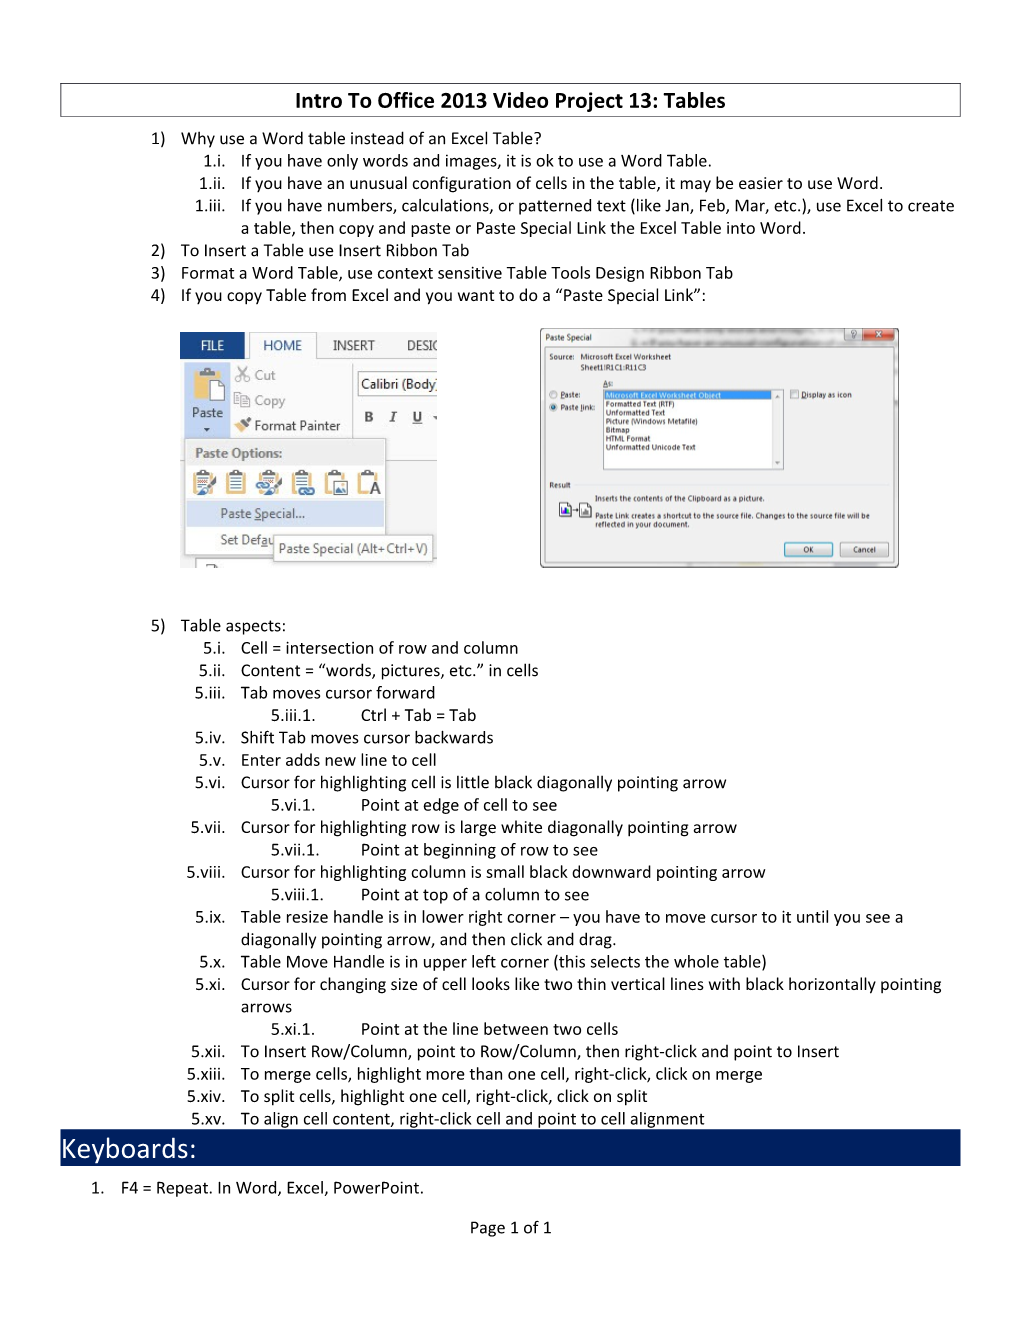 Intro to Office 2013 Video Project 13: Tables